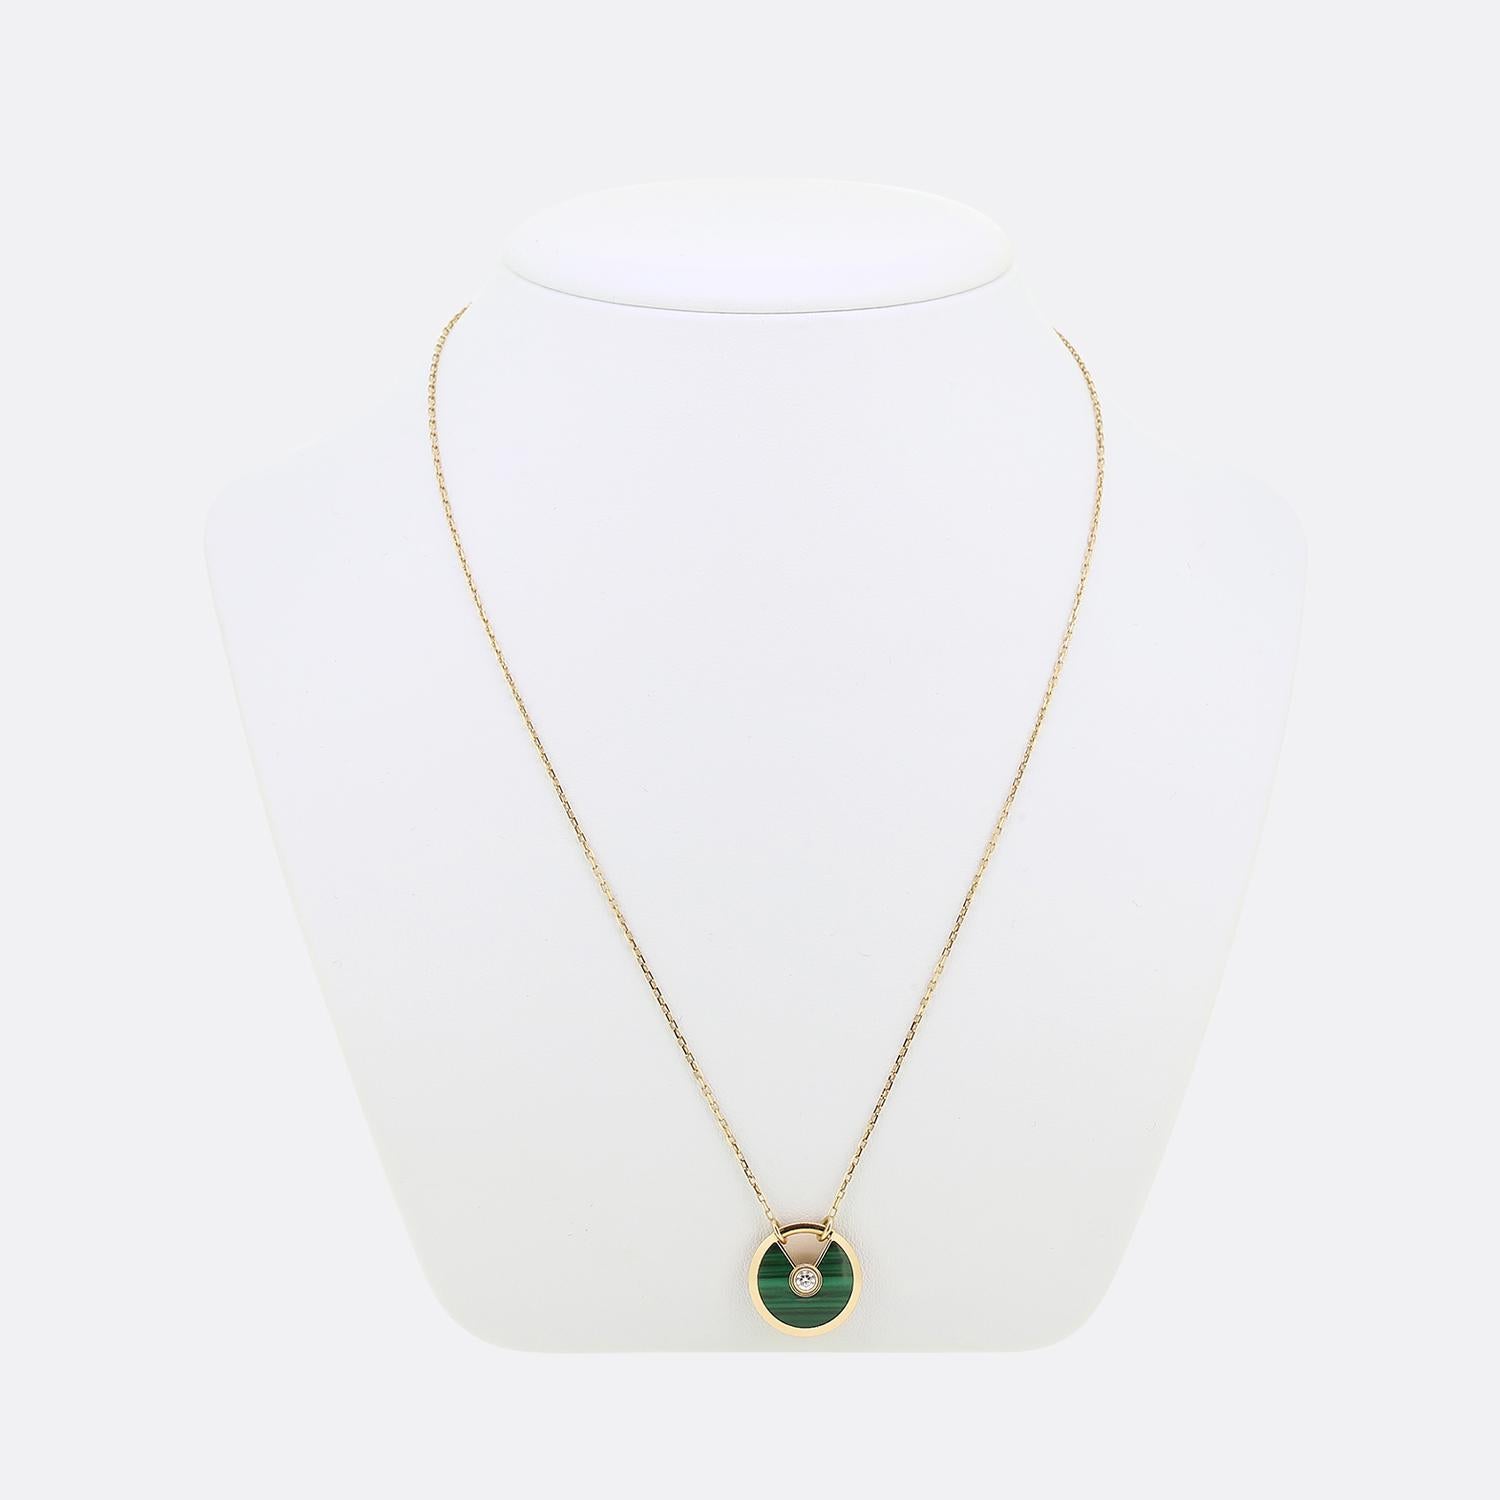 Here we have a fabulous necklace from the world renowned jewellery house of Cartier. This pendant forms part of their iconic 'Amulette' collection and features a single round brilliant cut diamond atop a malachite backdrop with a padlock opening to